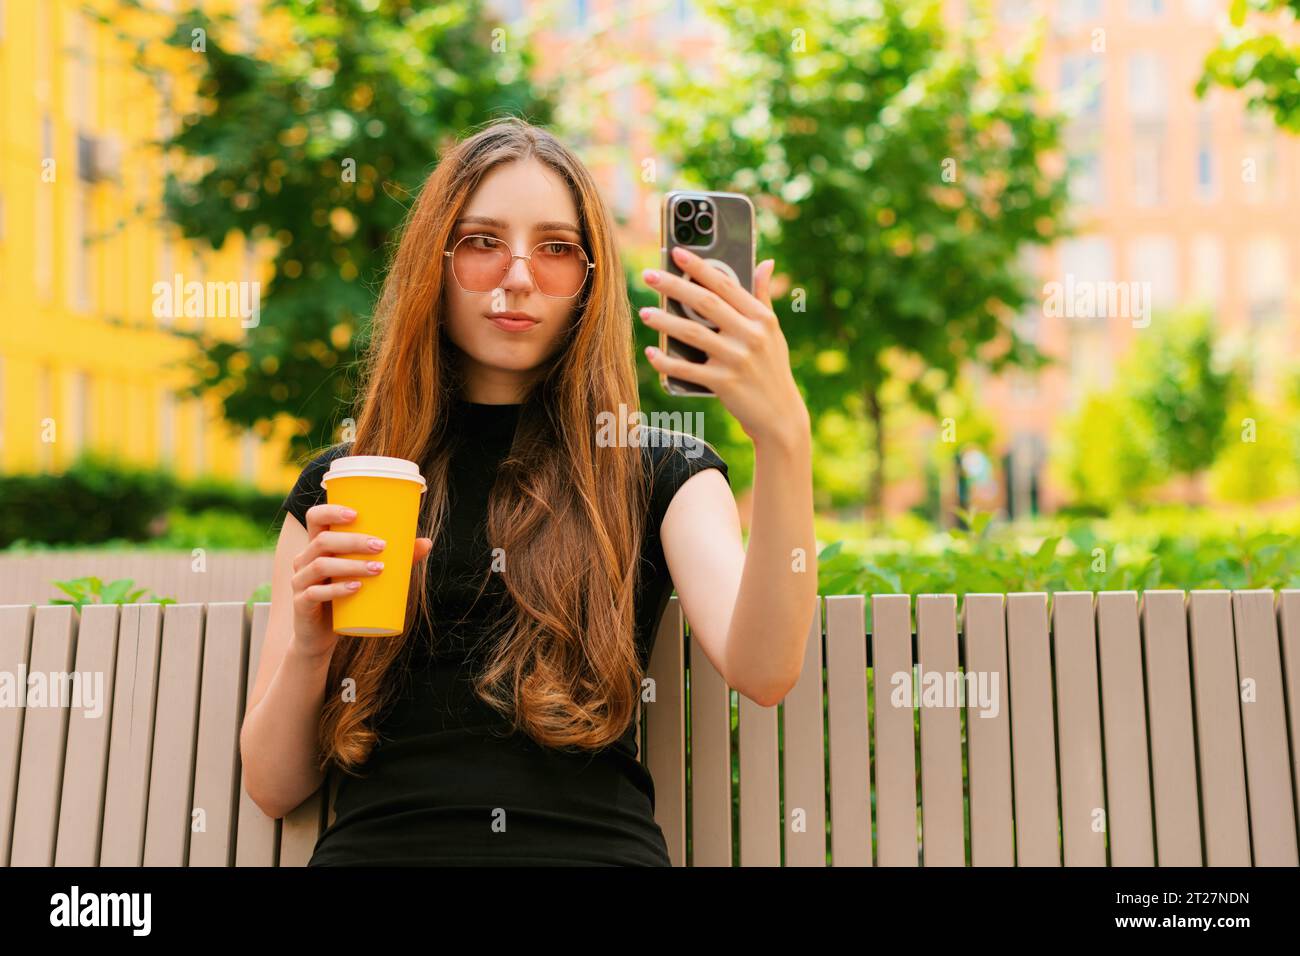 Smiling funny young girl with cool sunglasses using Social media with a Smart Phone sitting on a bench in town a holding disposable paper coffee cup Stock Photo